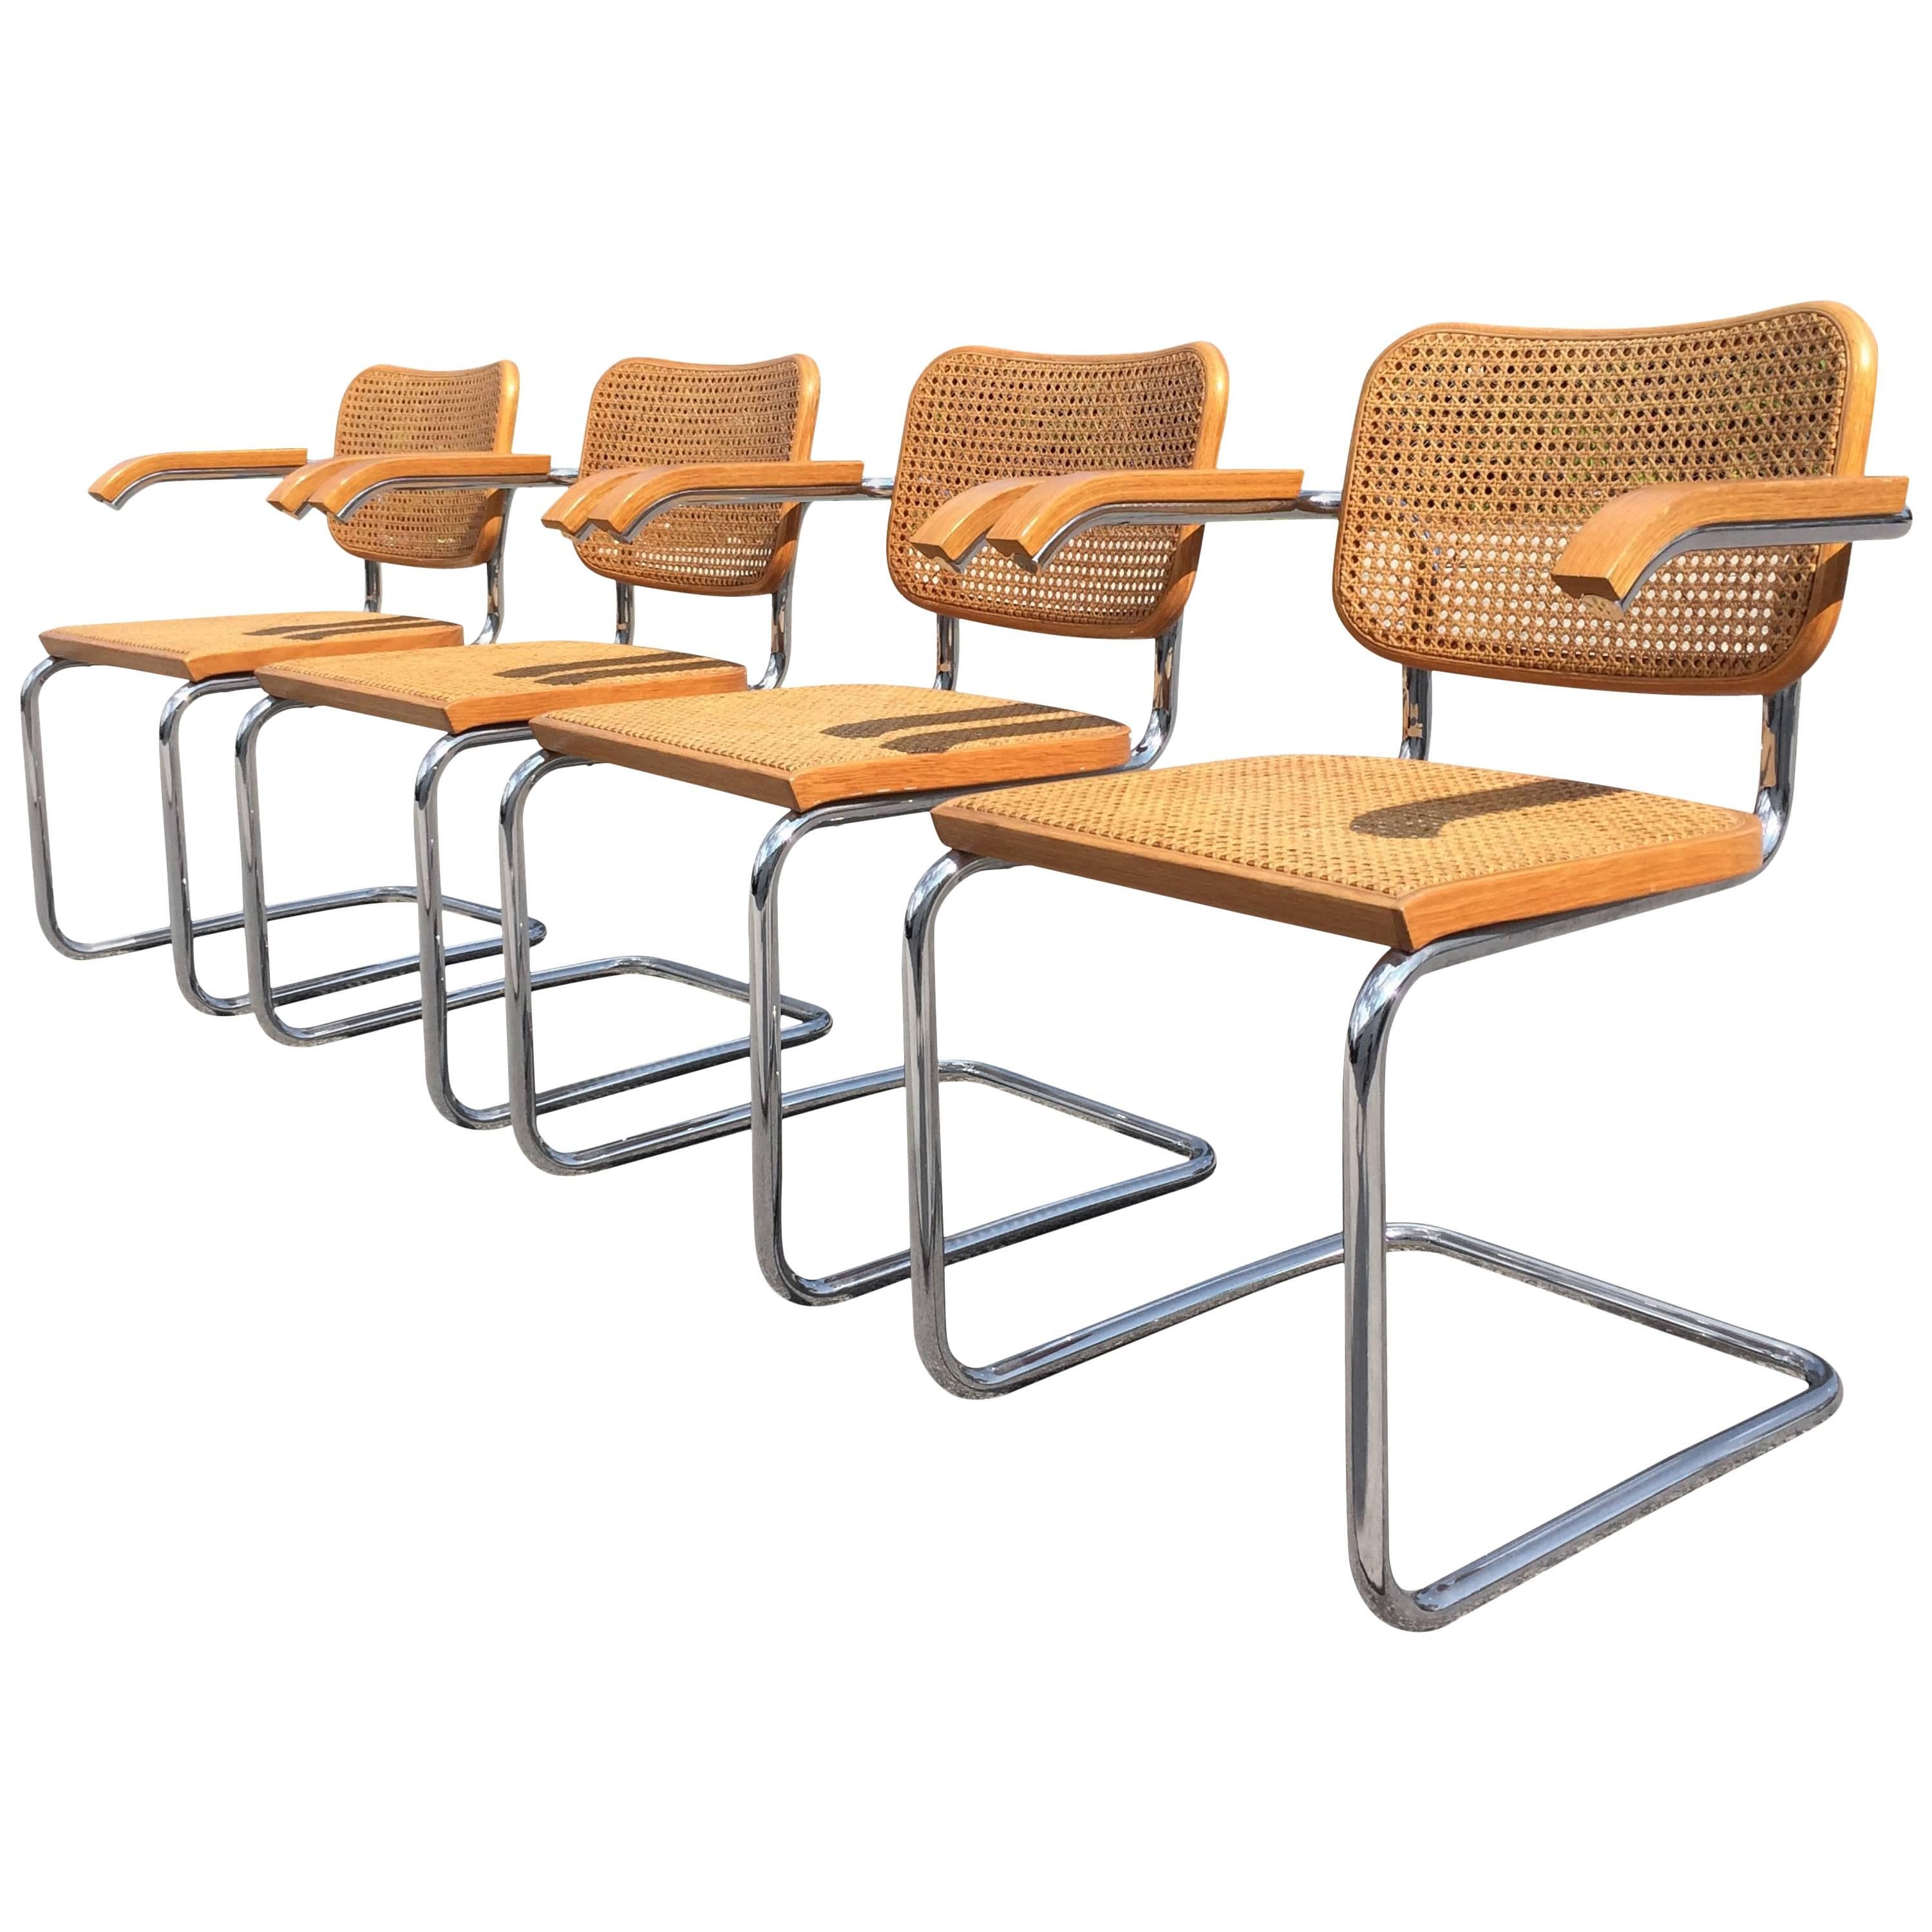 Four Cesca Armchairs Designed by Marcel Breuer for Knoll